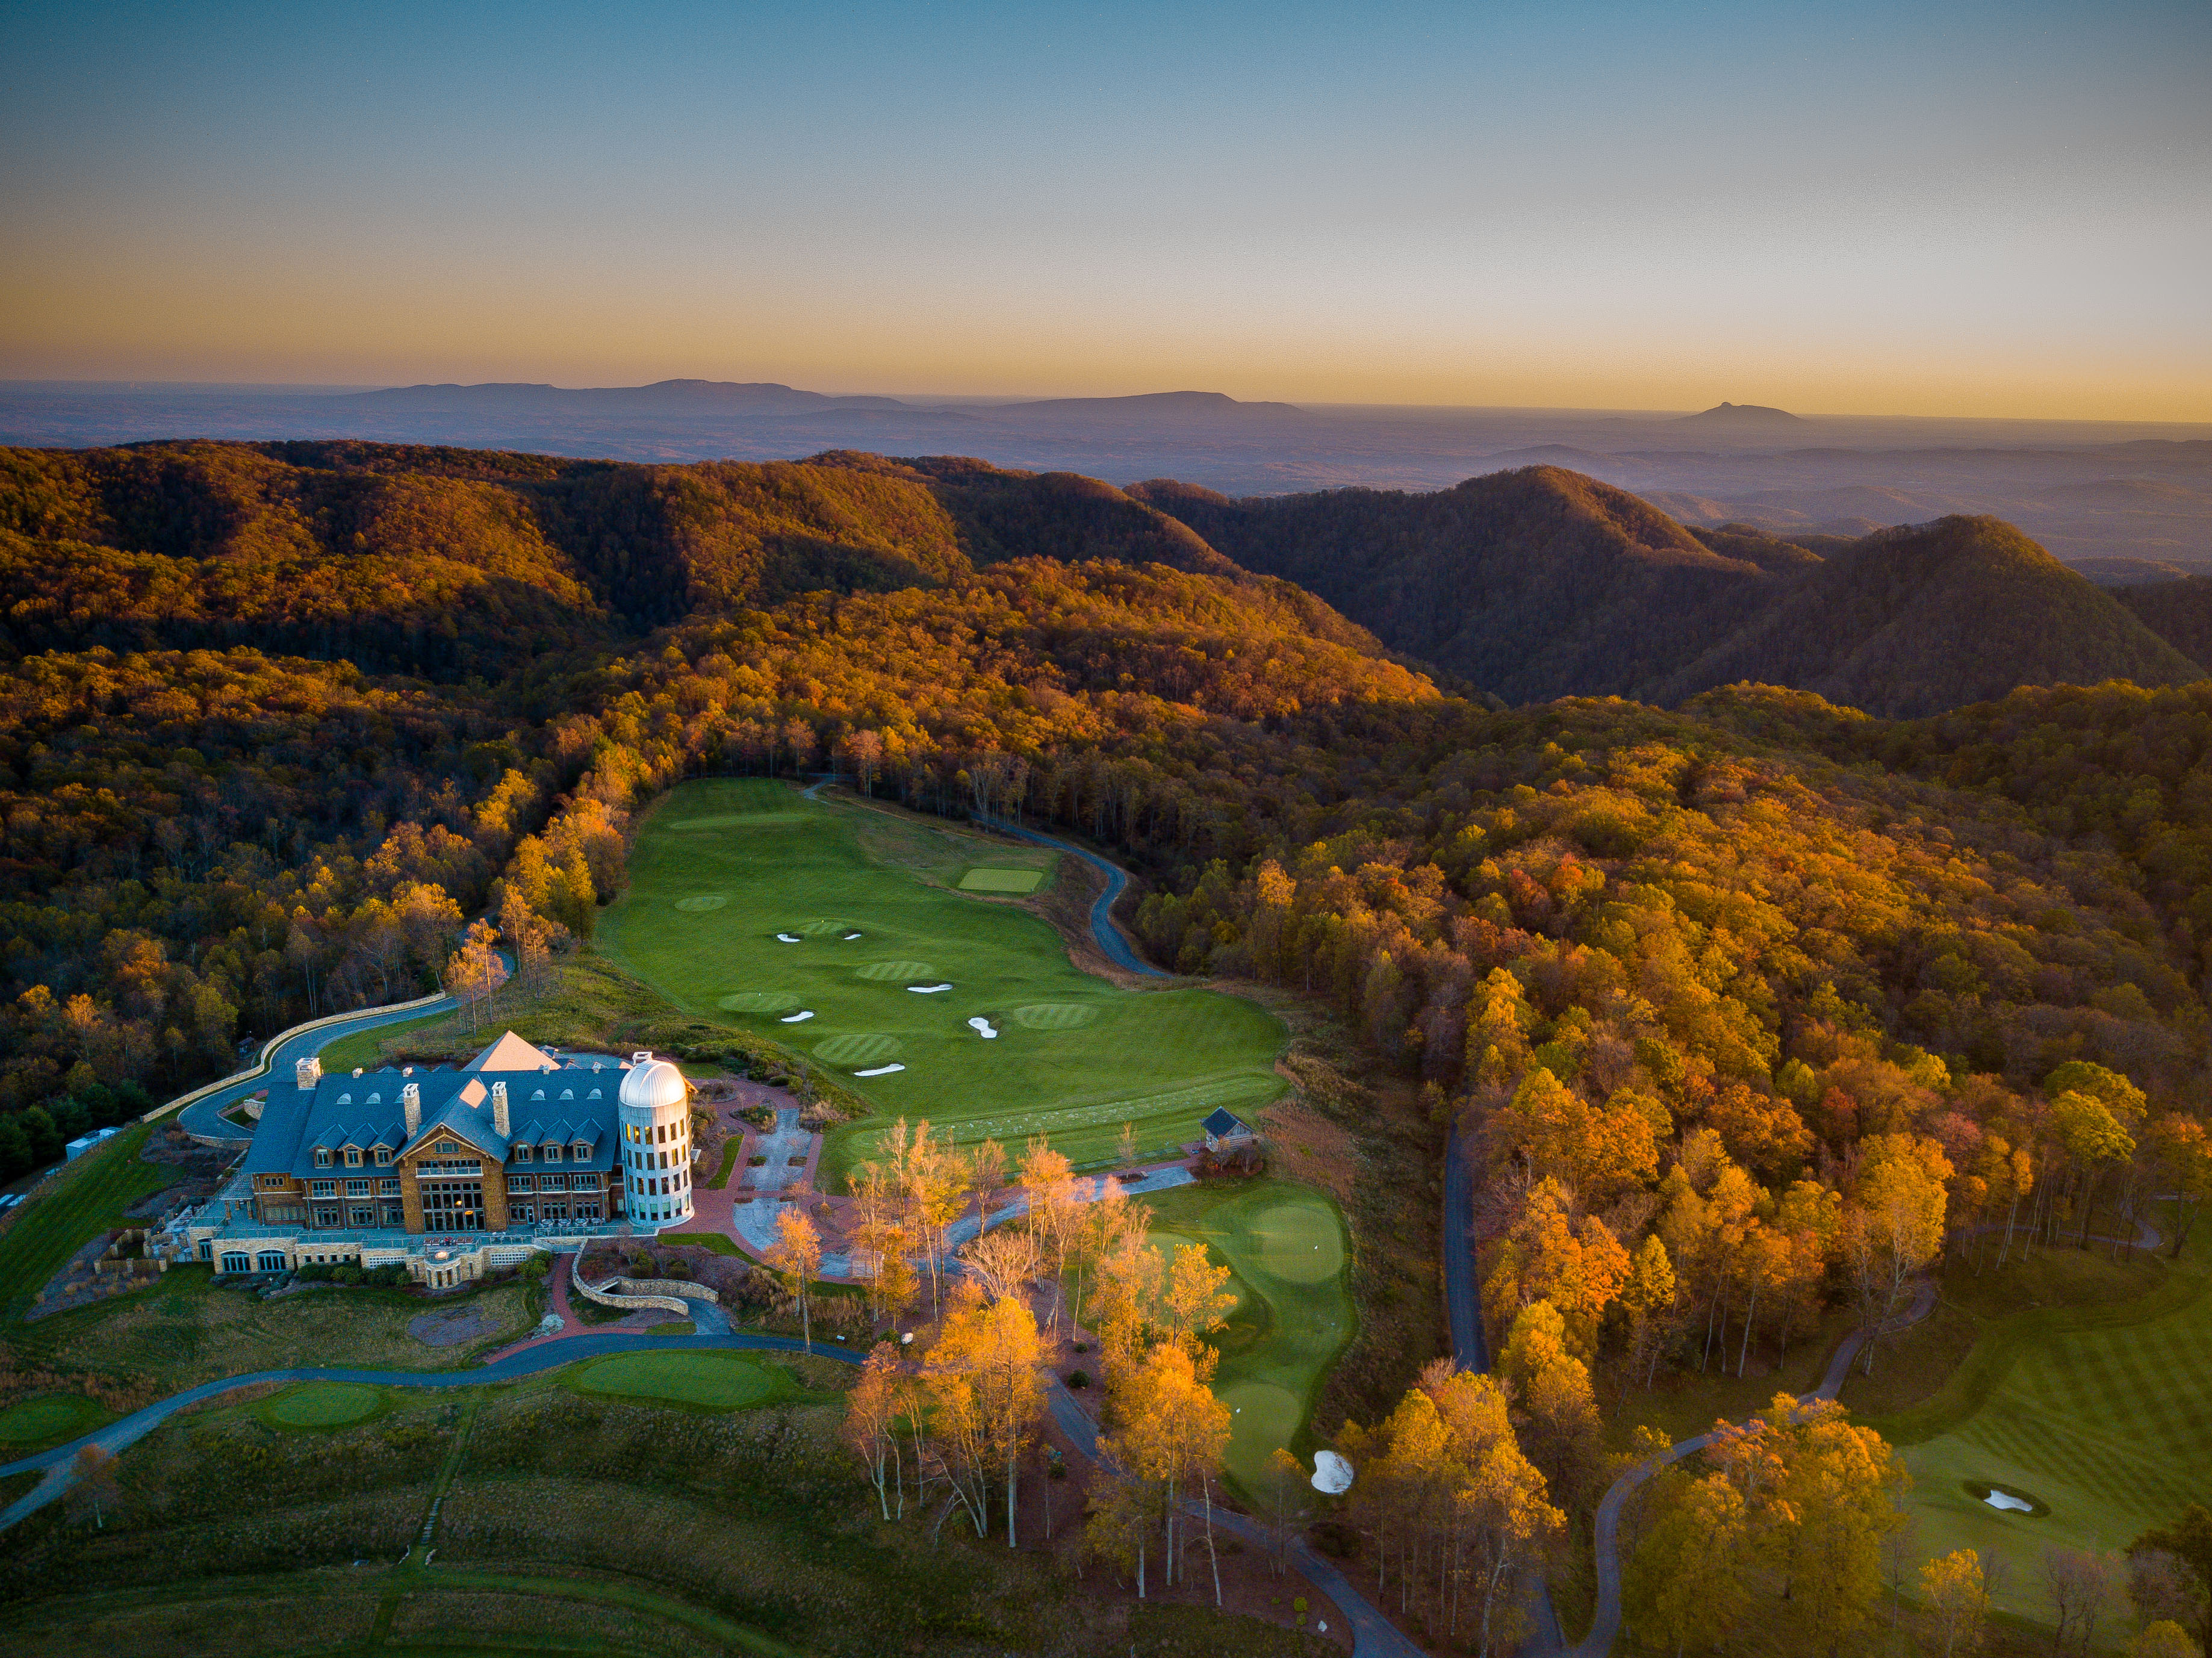 Explore The Blue Ridge Mountains At Primland This Fall - The Golf Wire